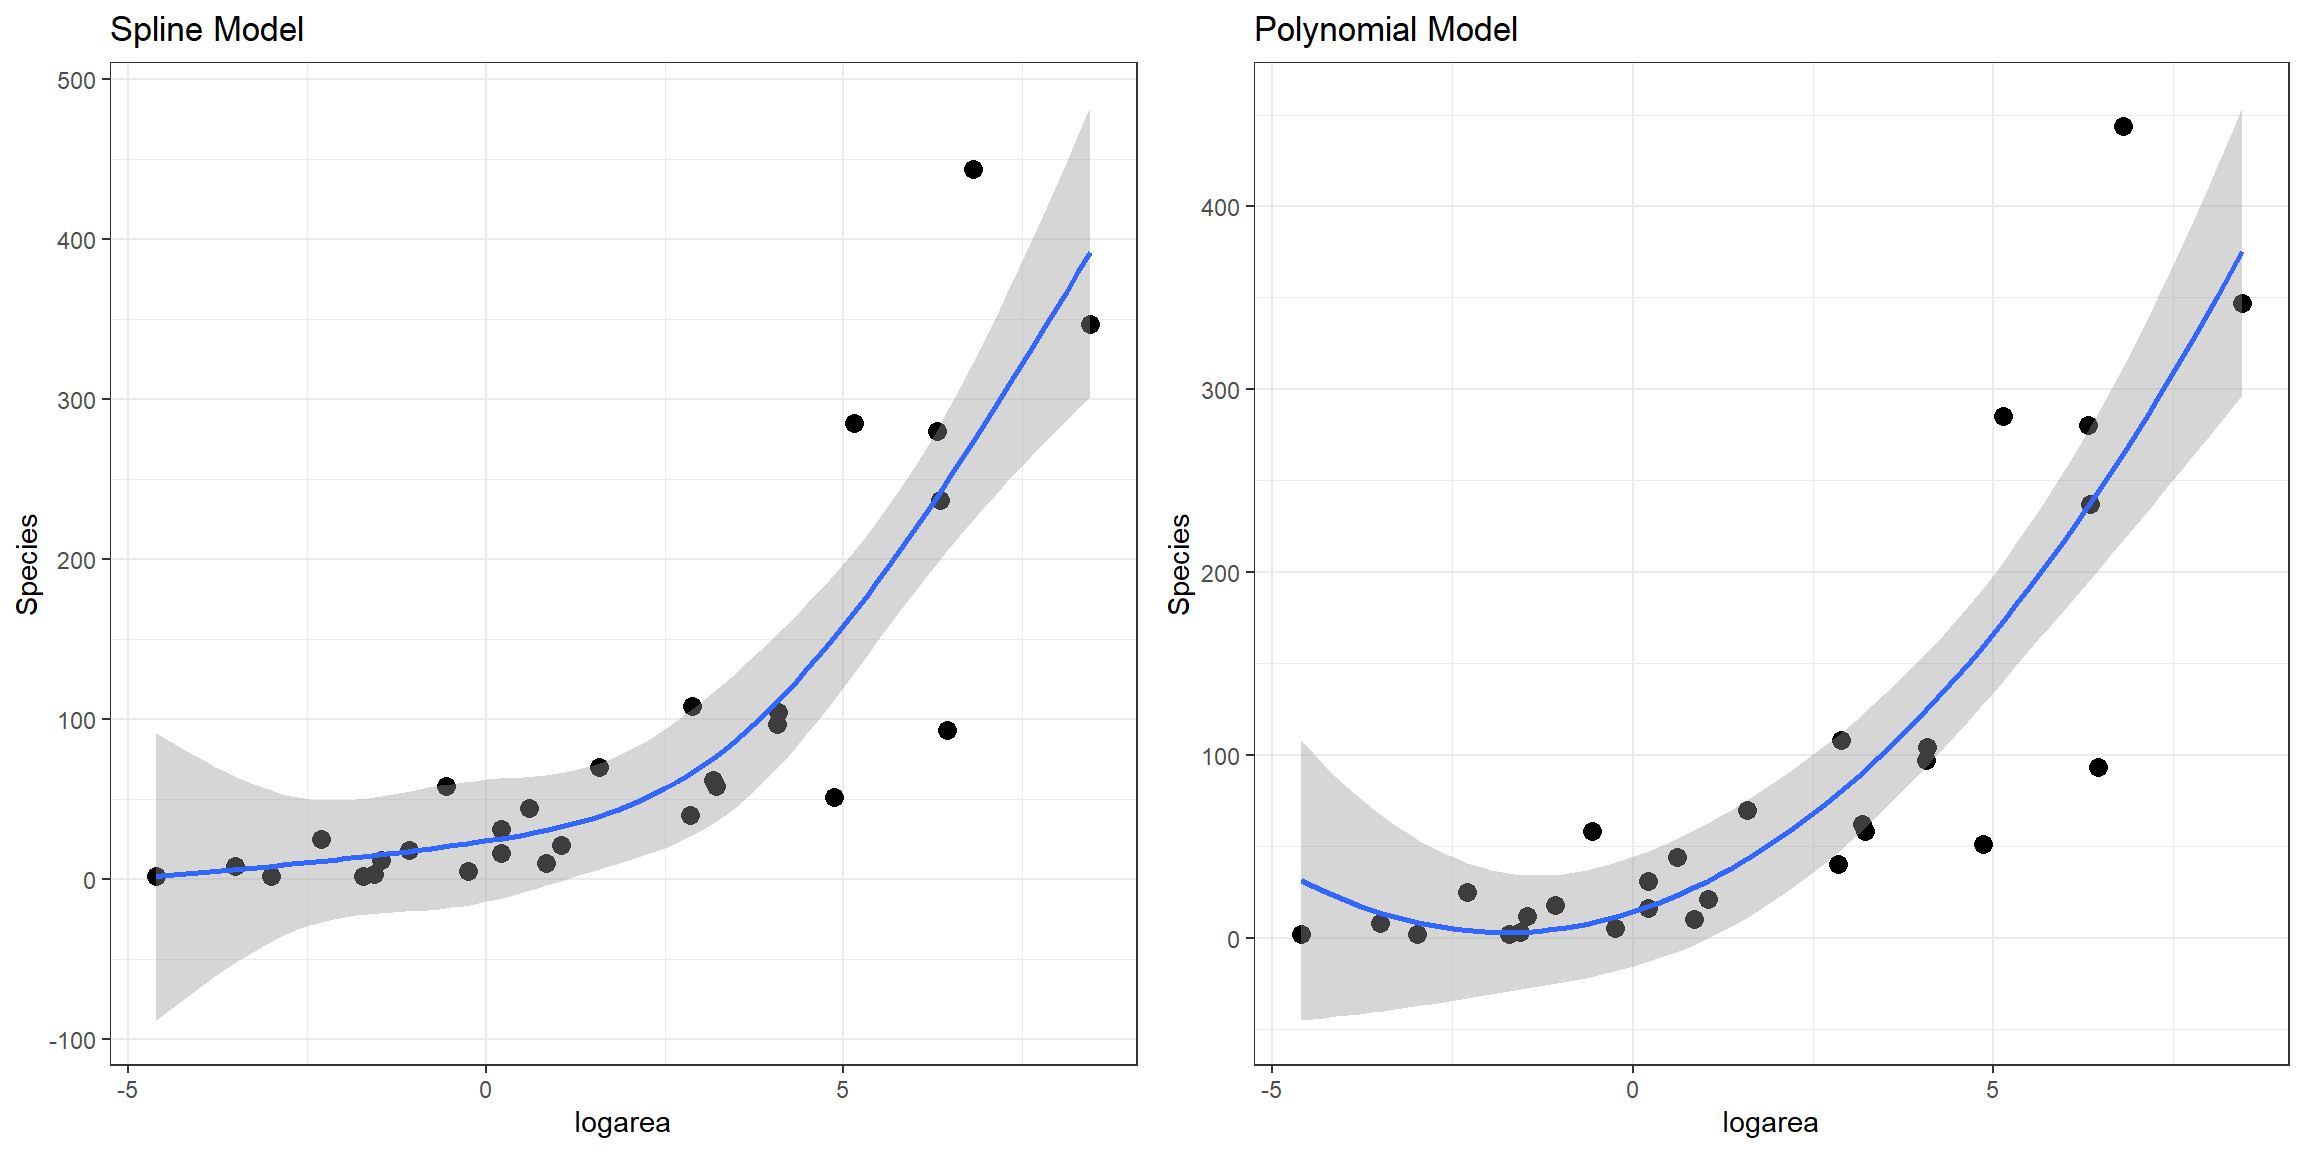 Comparison of predicted values from the natural cubic regression spline and polynomial models fit to plant species richness data collected from 29 islands in the Galapagos Islands archipelago. Data are from (Johnson & Raven, 1973).